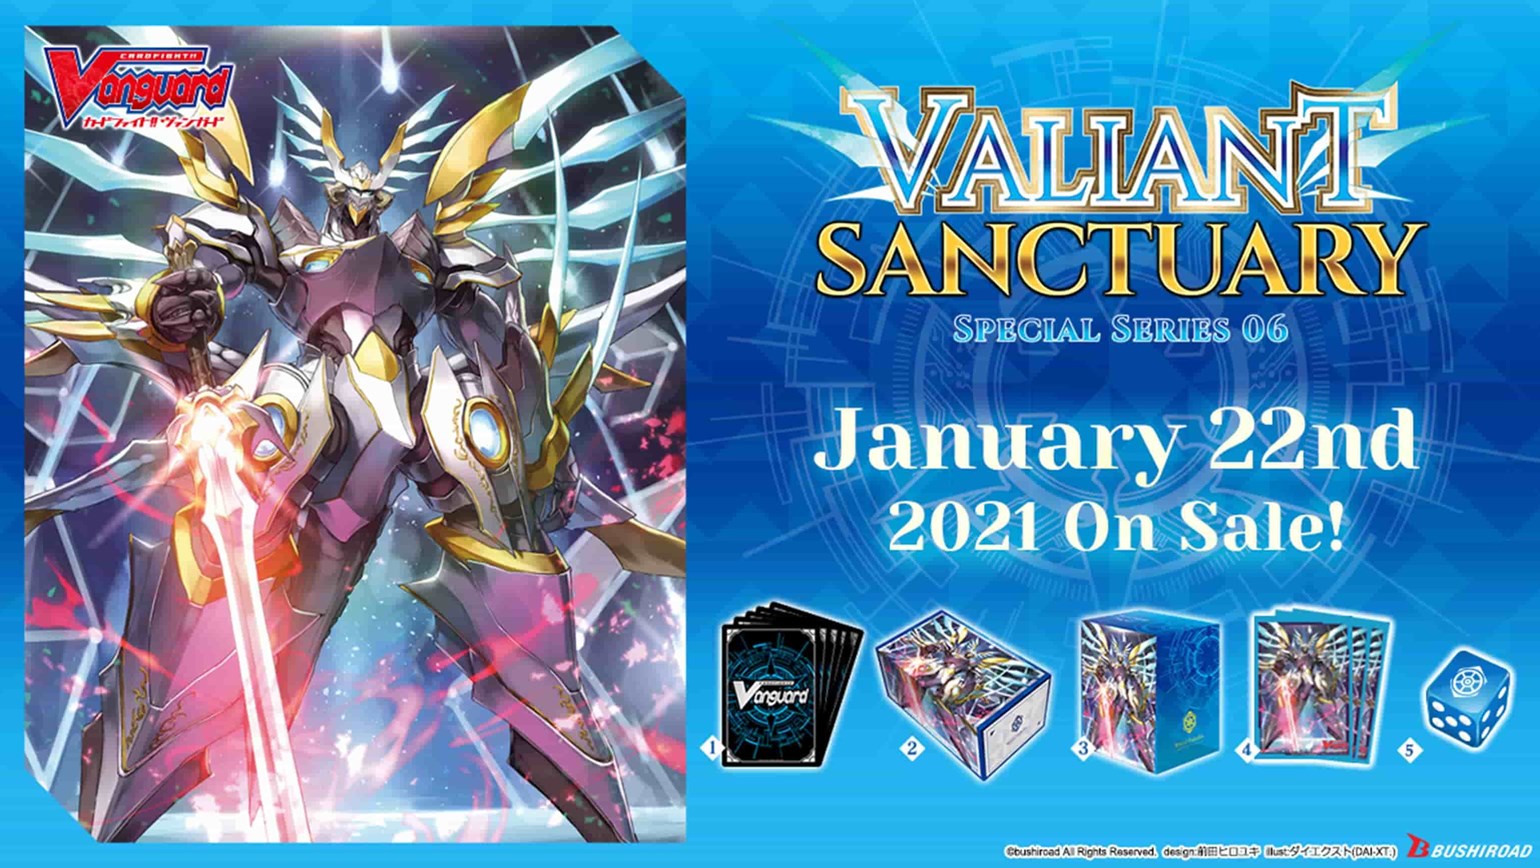 New English Edition Special Series 06 “Valiant Sanctuary” is Coming to Stores on January 22nd! (1)